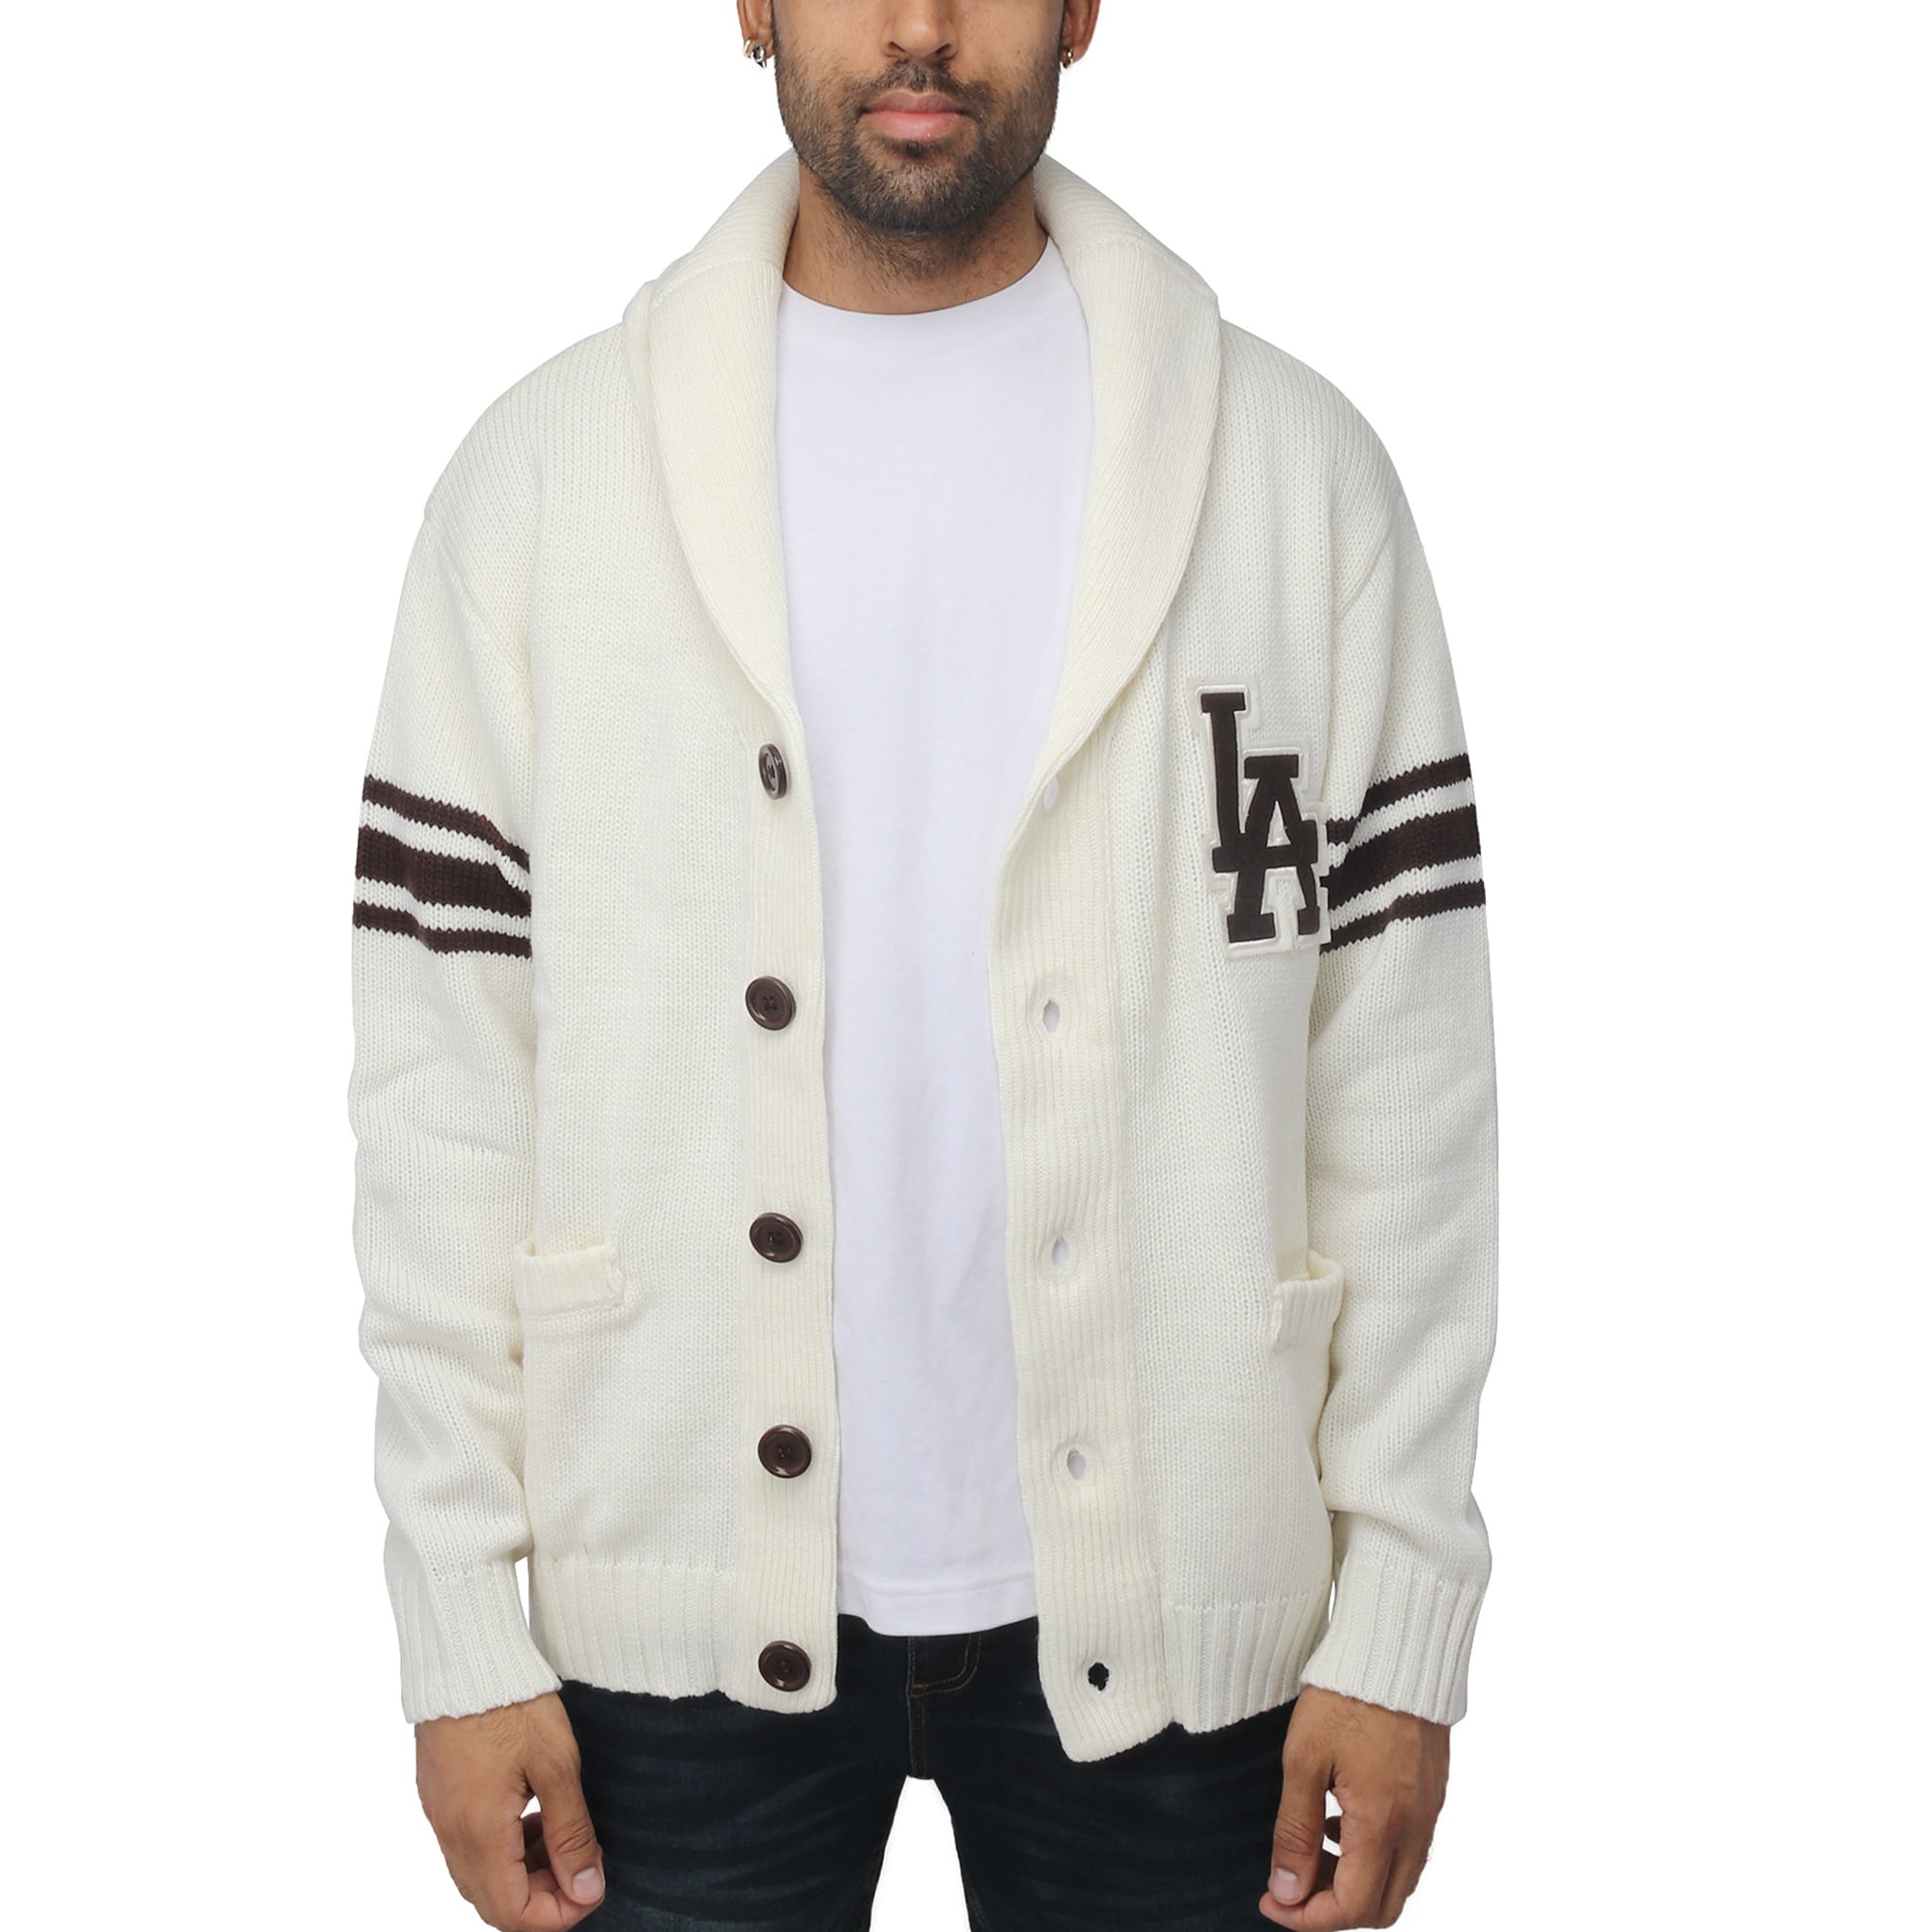 campingvogn sikring Kreta Men's Shawl Collar Heavy Gauge Cardigan with City Patch - Long Sleeve  Classic Fit Casual Fashion Sweater Cream - Walmart.com